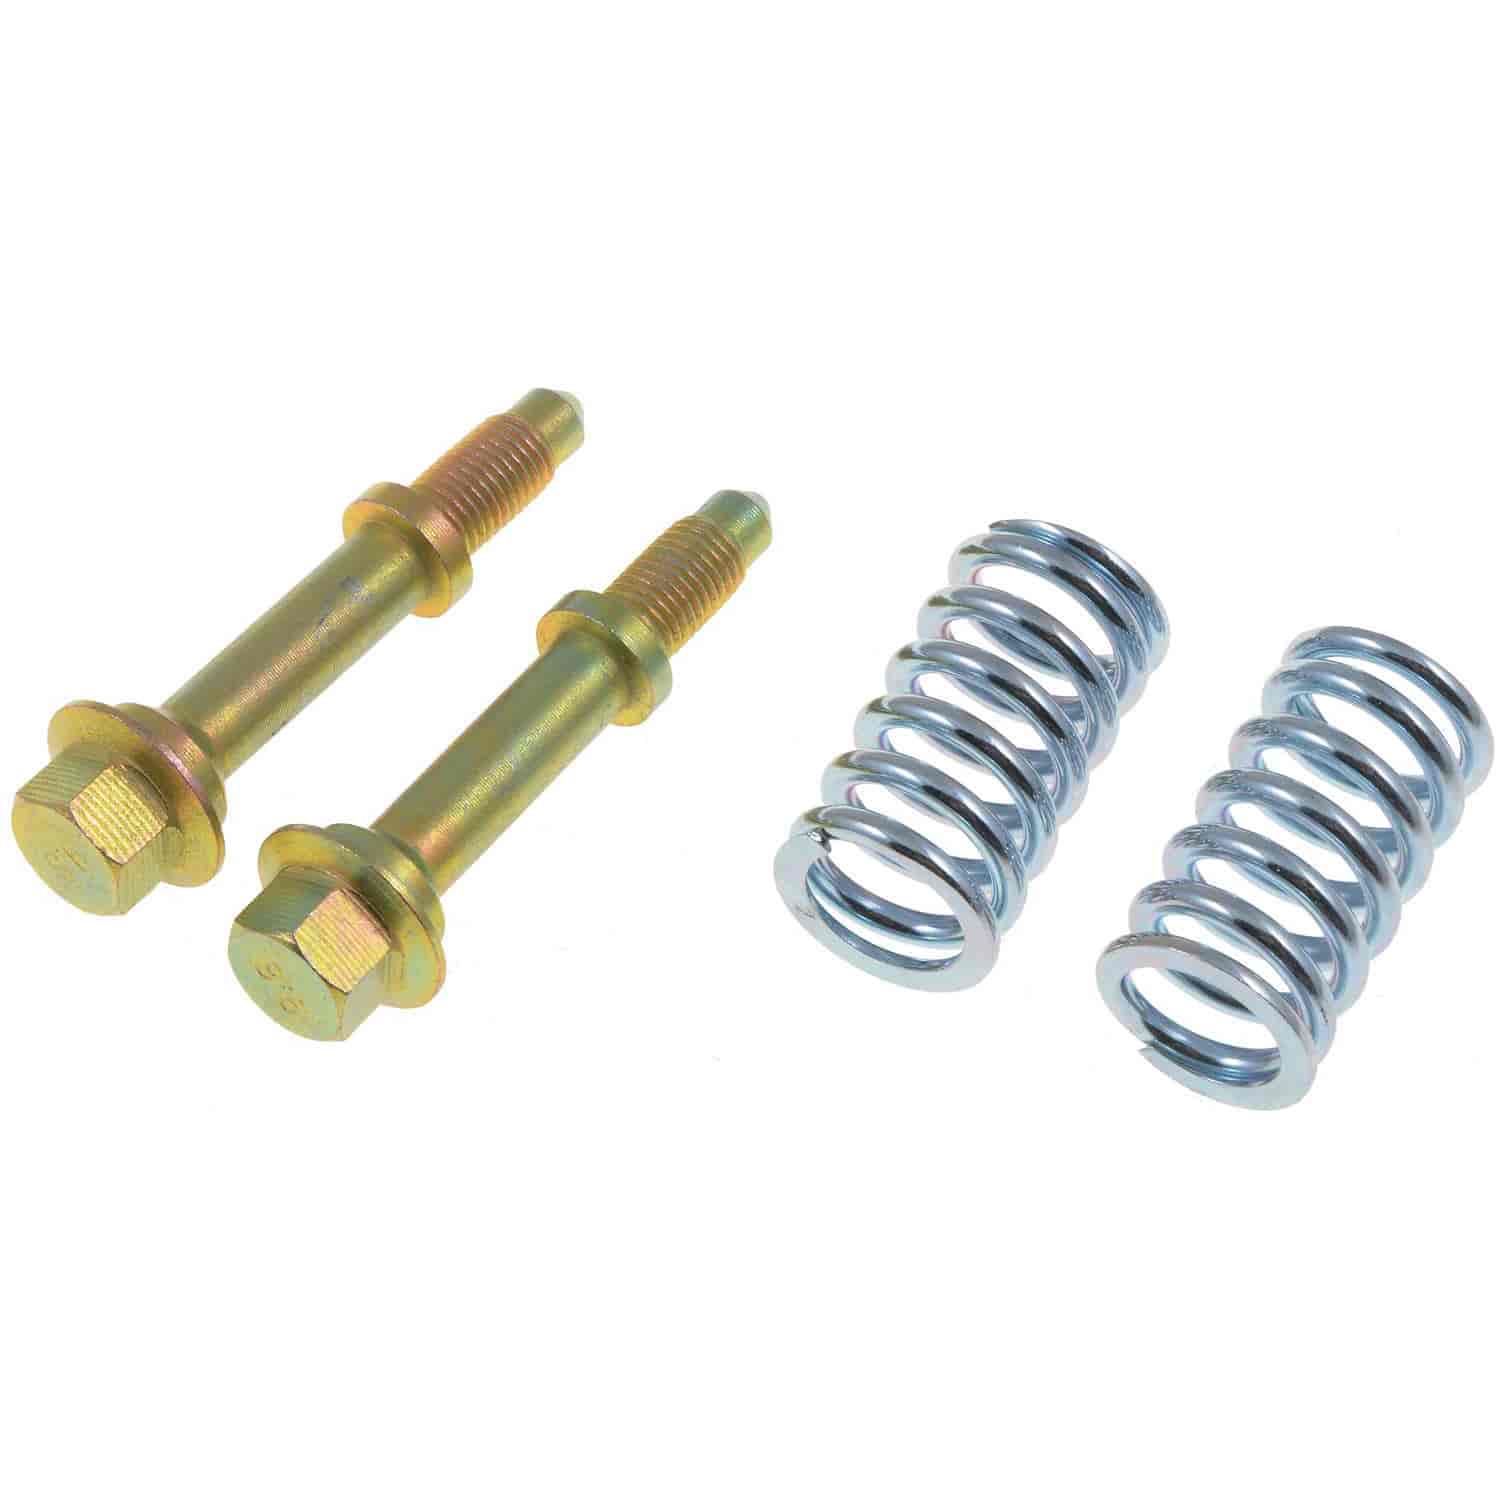 Manifold Bolt and Spring Kit - 3/8-16 x